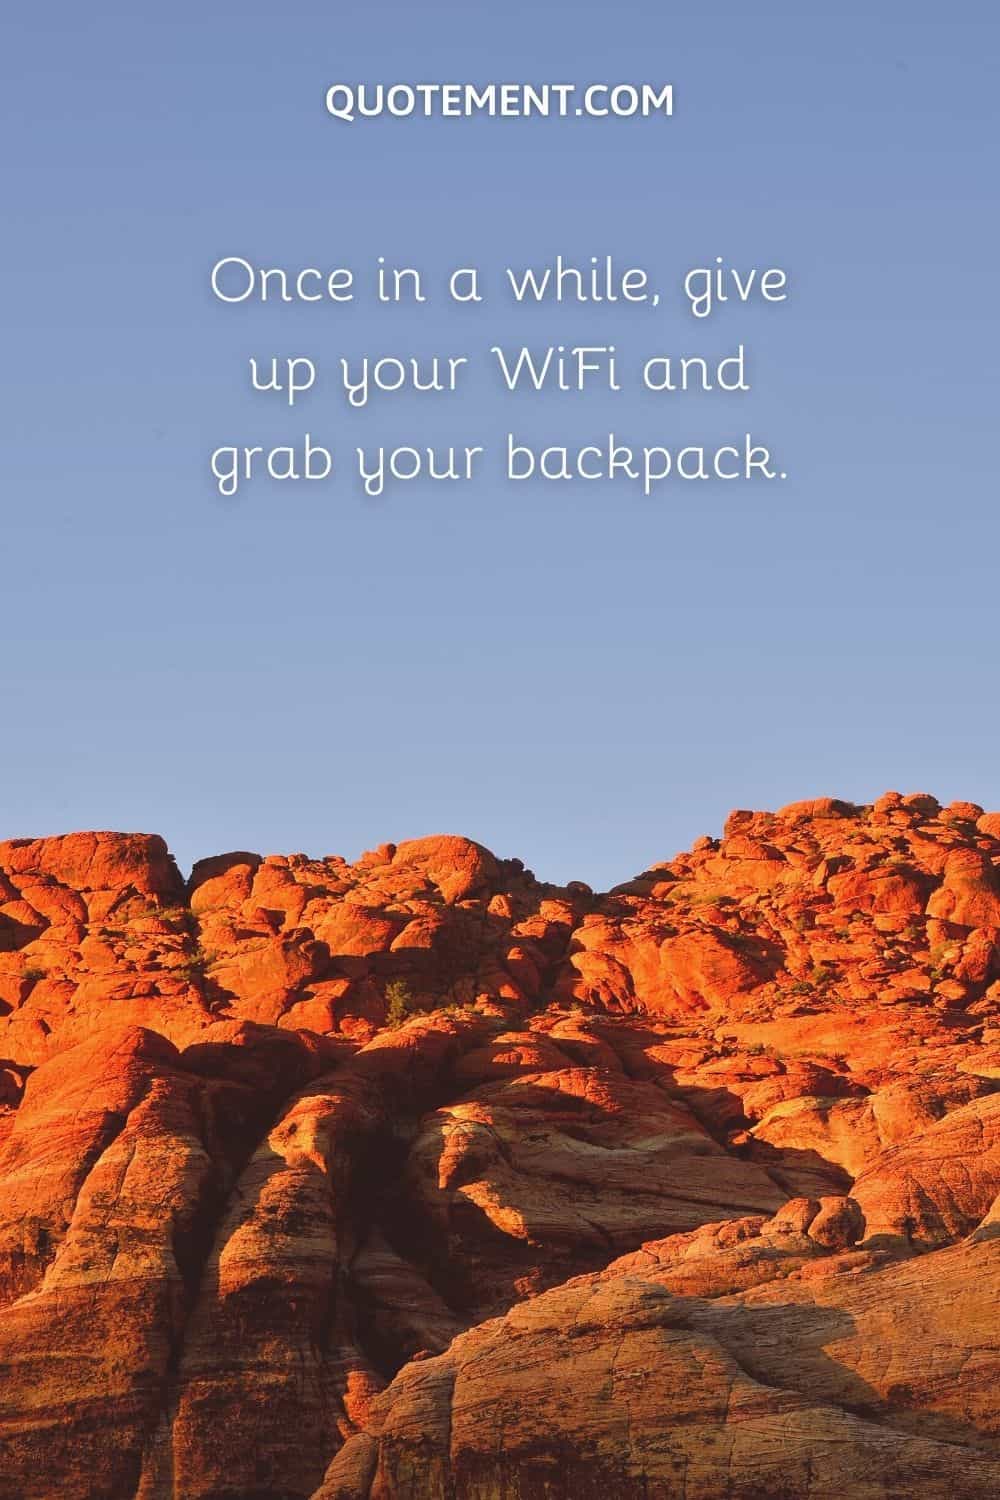 Once in a while, give up your WiFi and grab your backpack.